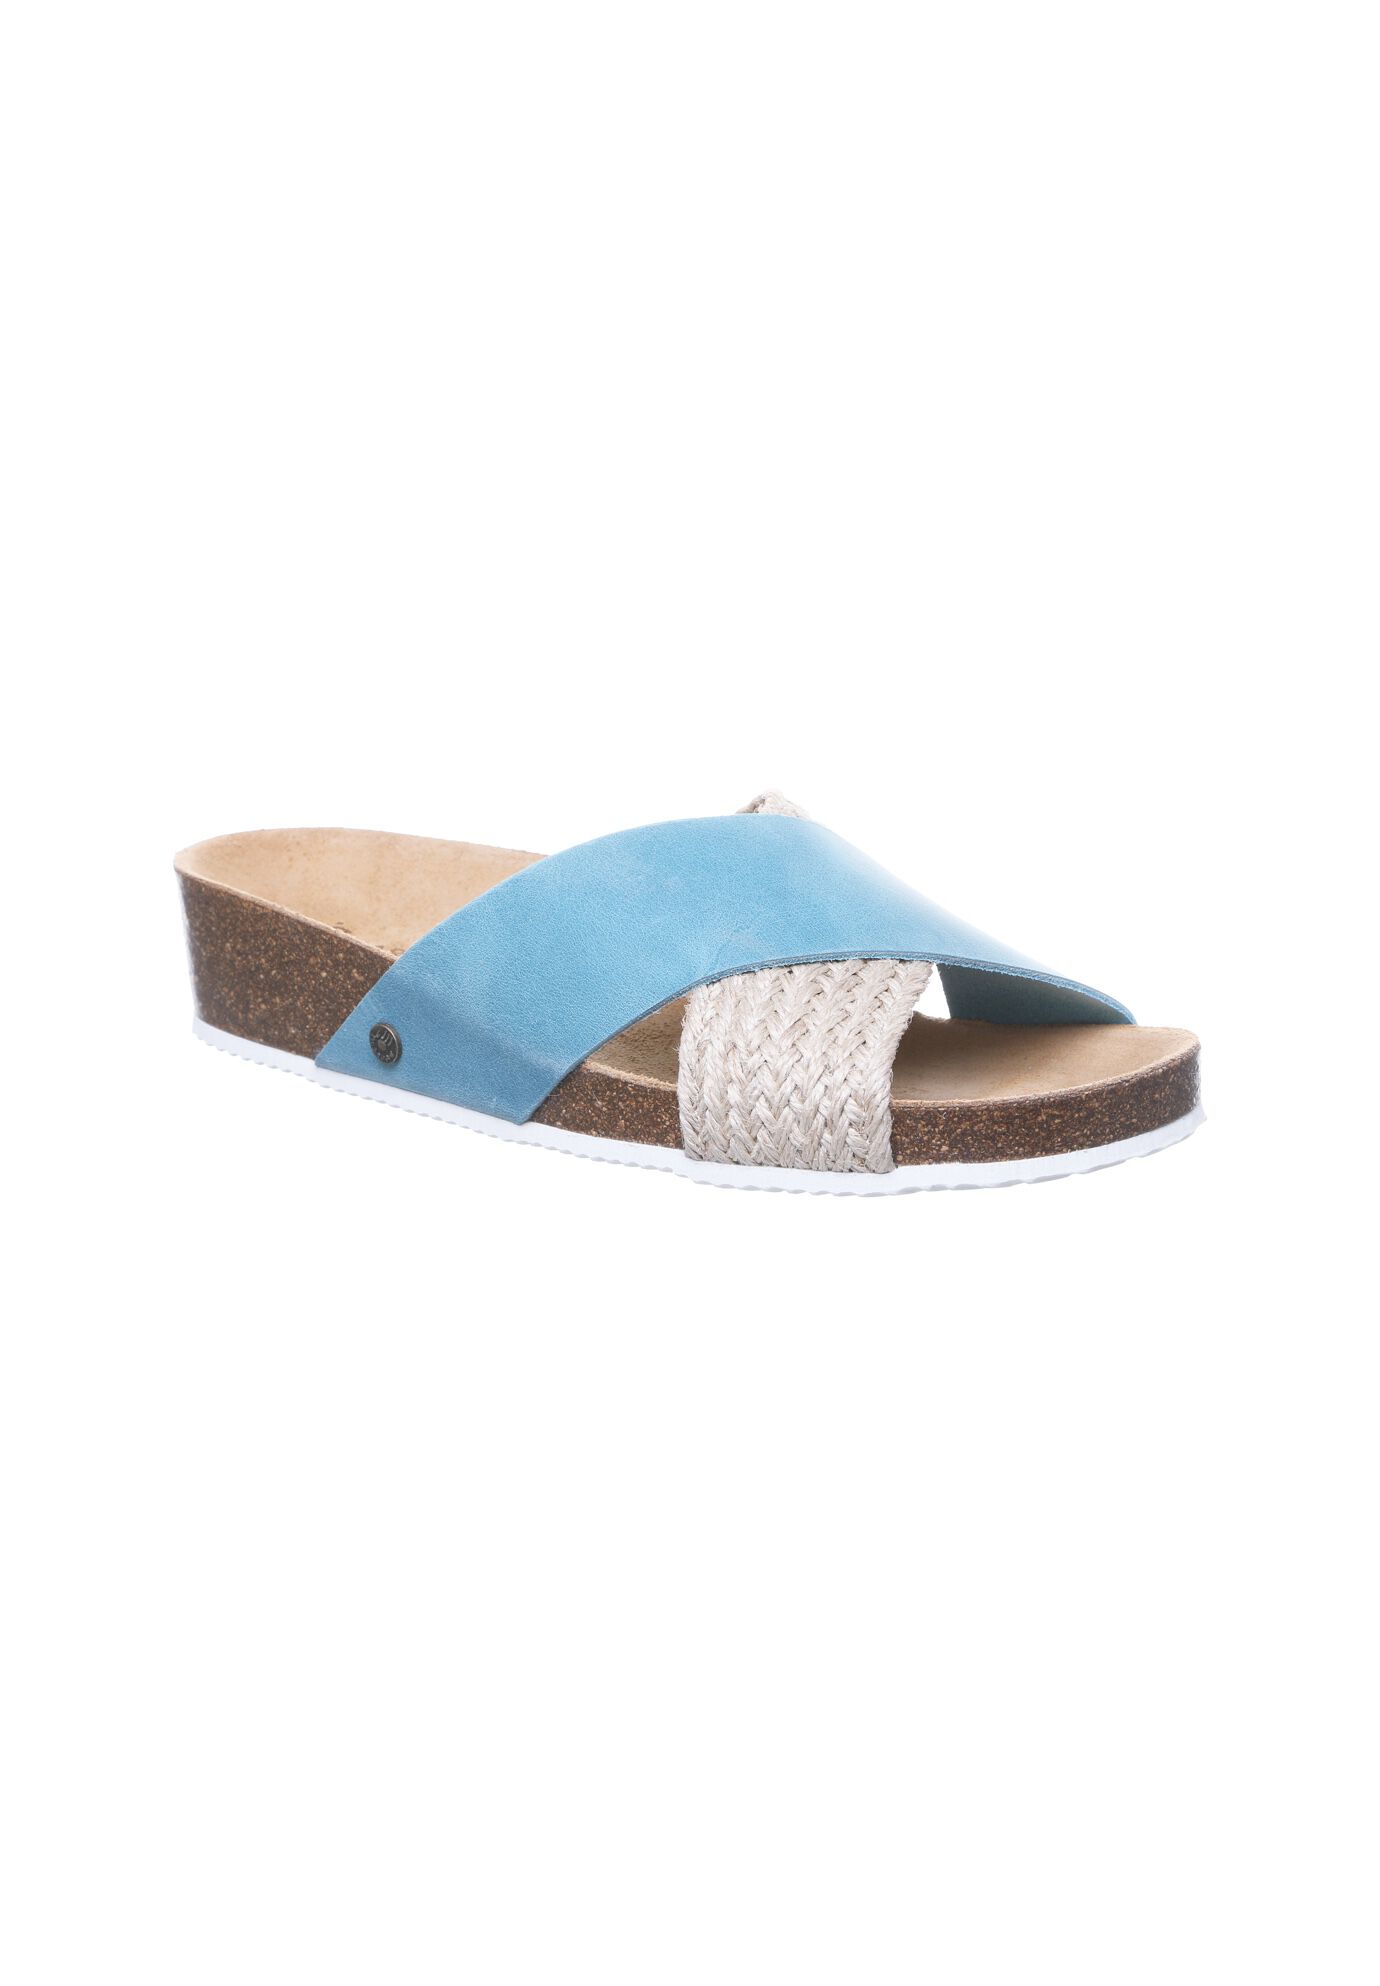 Women's Bearpaw Valentina Comfort Footbed Sandal by BEARPAW in Blue (Size 8 M)